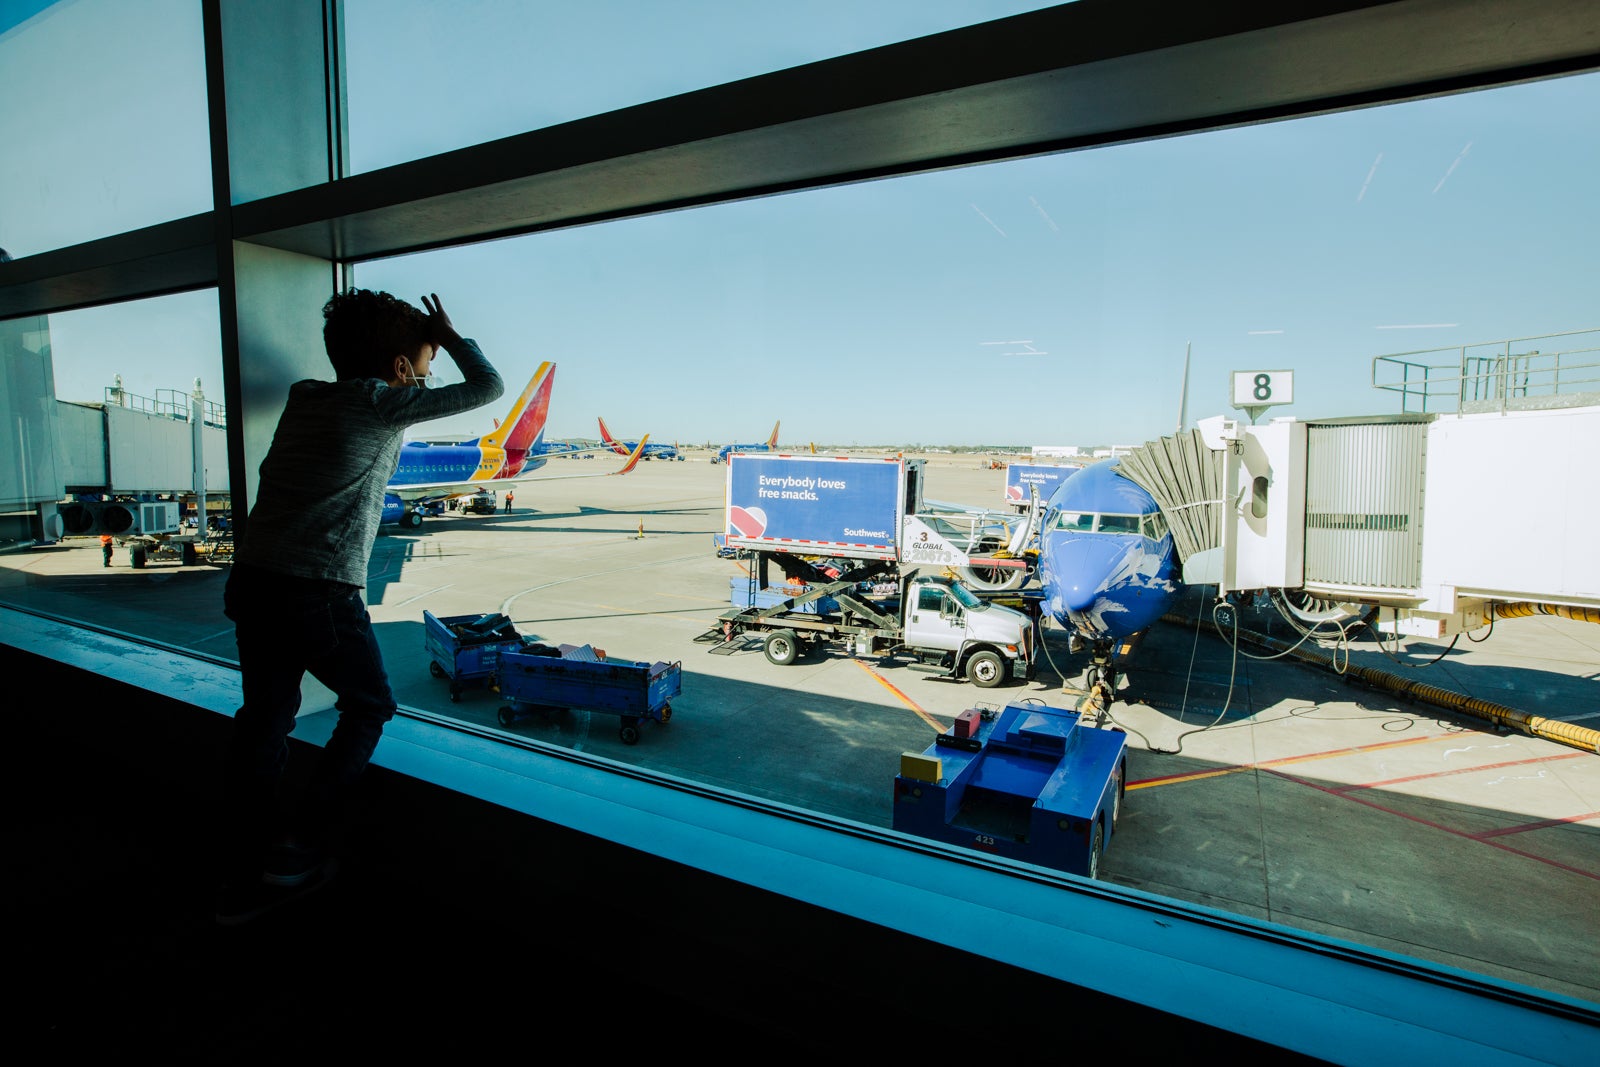 a child looks out the window of an airport, looking at a Southwest Airlines plane parked at a gate